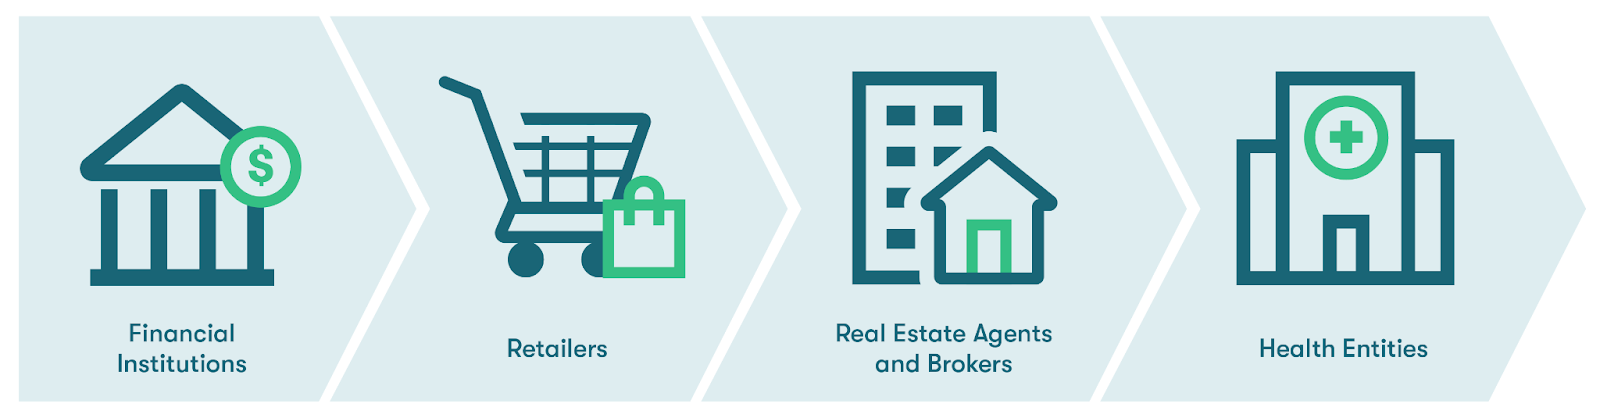 Graphic of 4 icons representing four types of businesses, financial institutions, retailers, real estate agents and brokers, and healthcare entities, which are at a higher risk for cyber breaches.